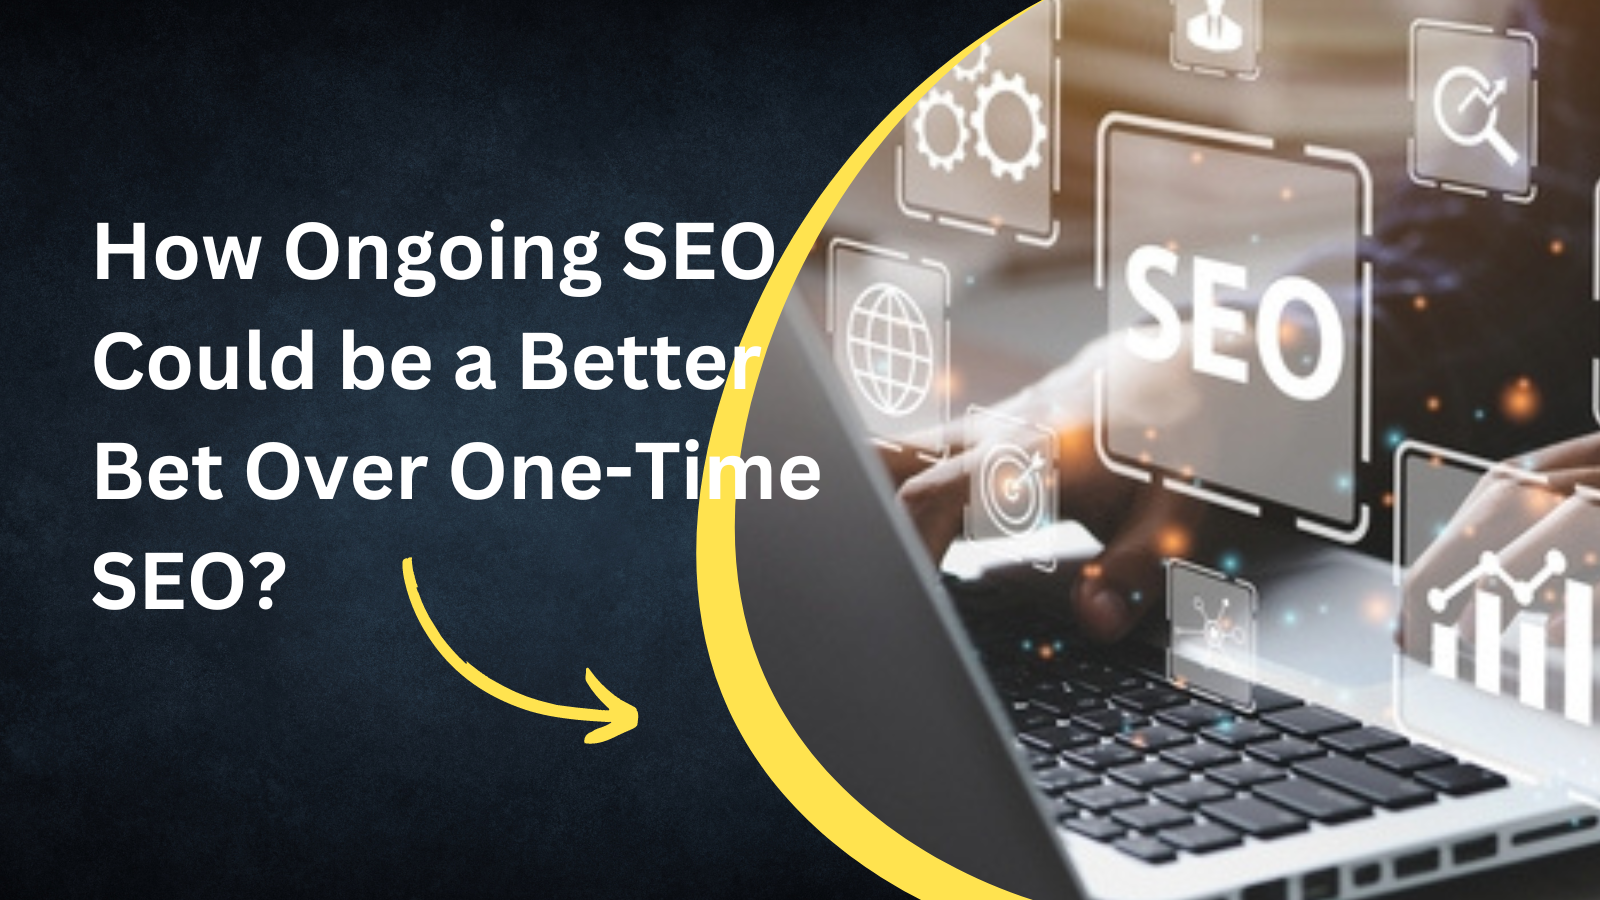 How Ongoing SEO Could be a Better Bet Over One-Time SEO?